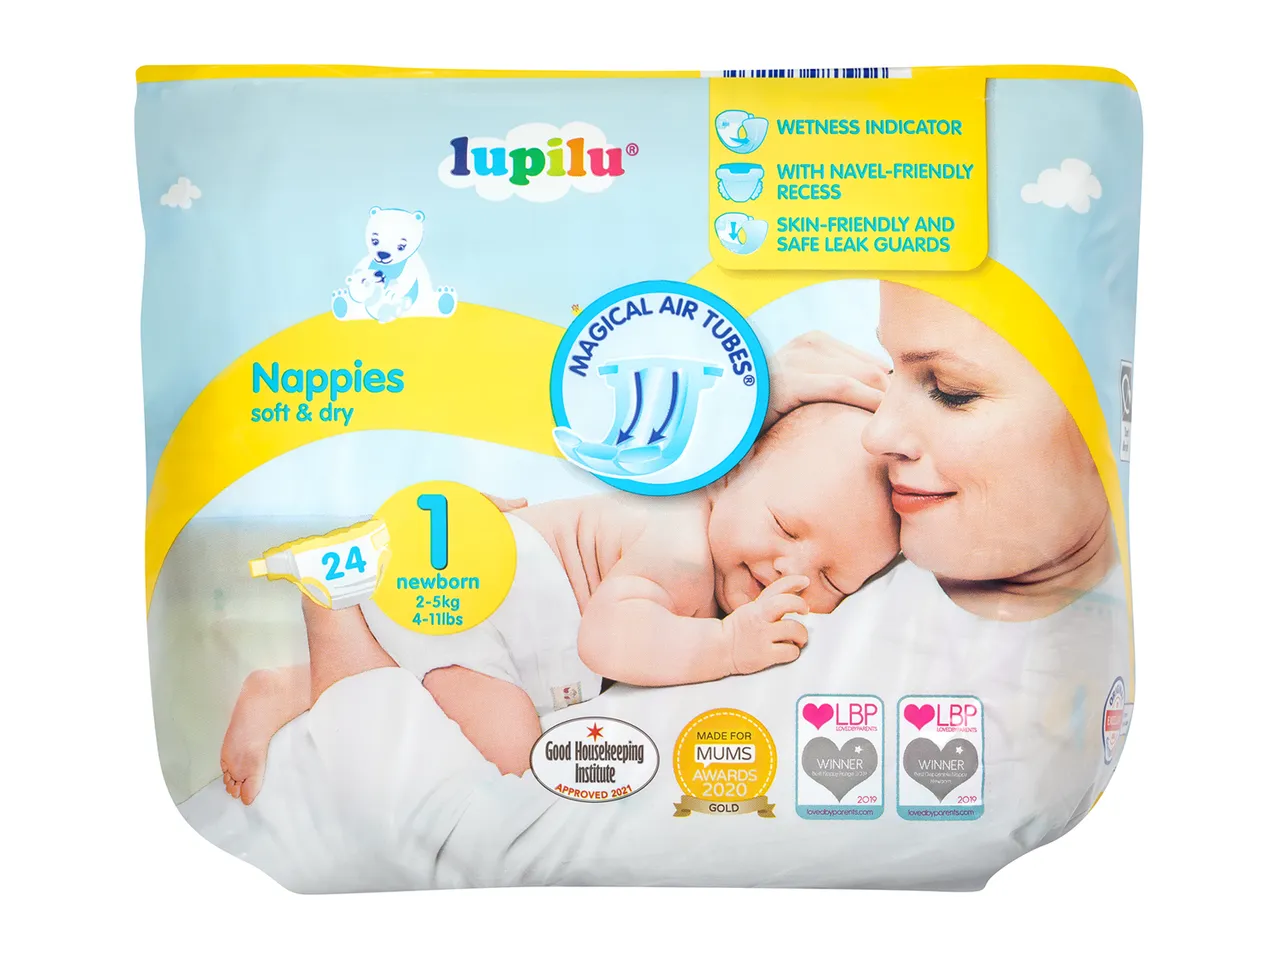 Go to full screen view: Lupilu Newborn Nappies Size 1 - Image 1